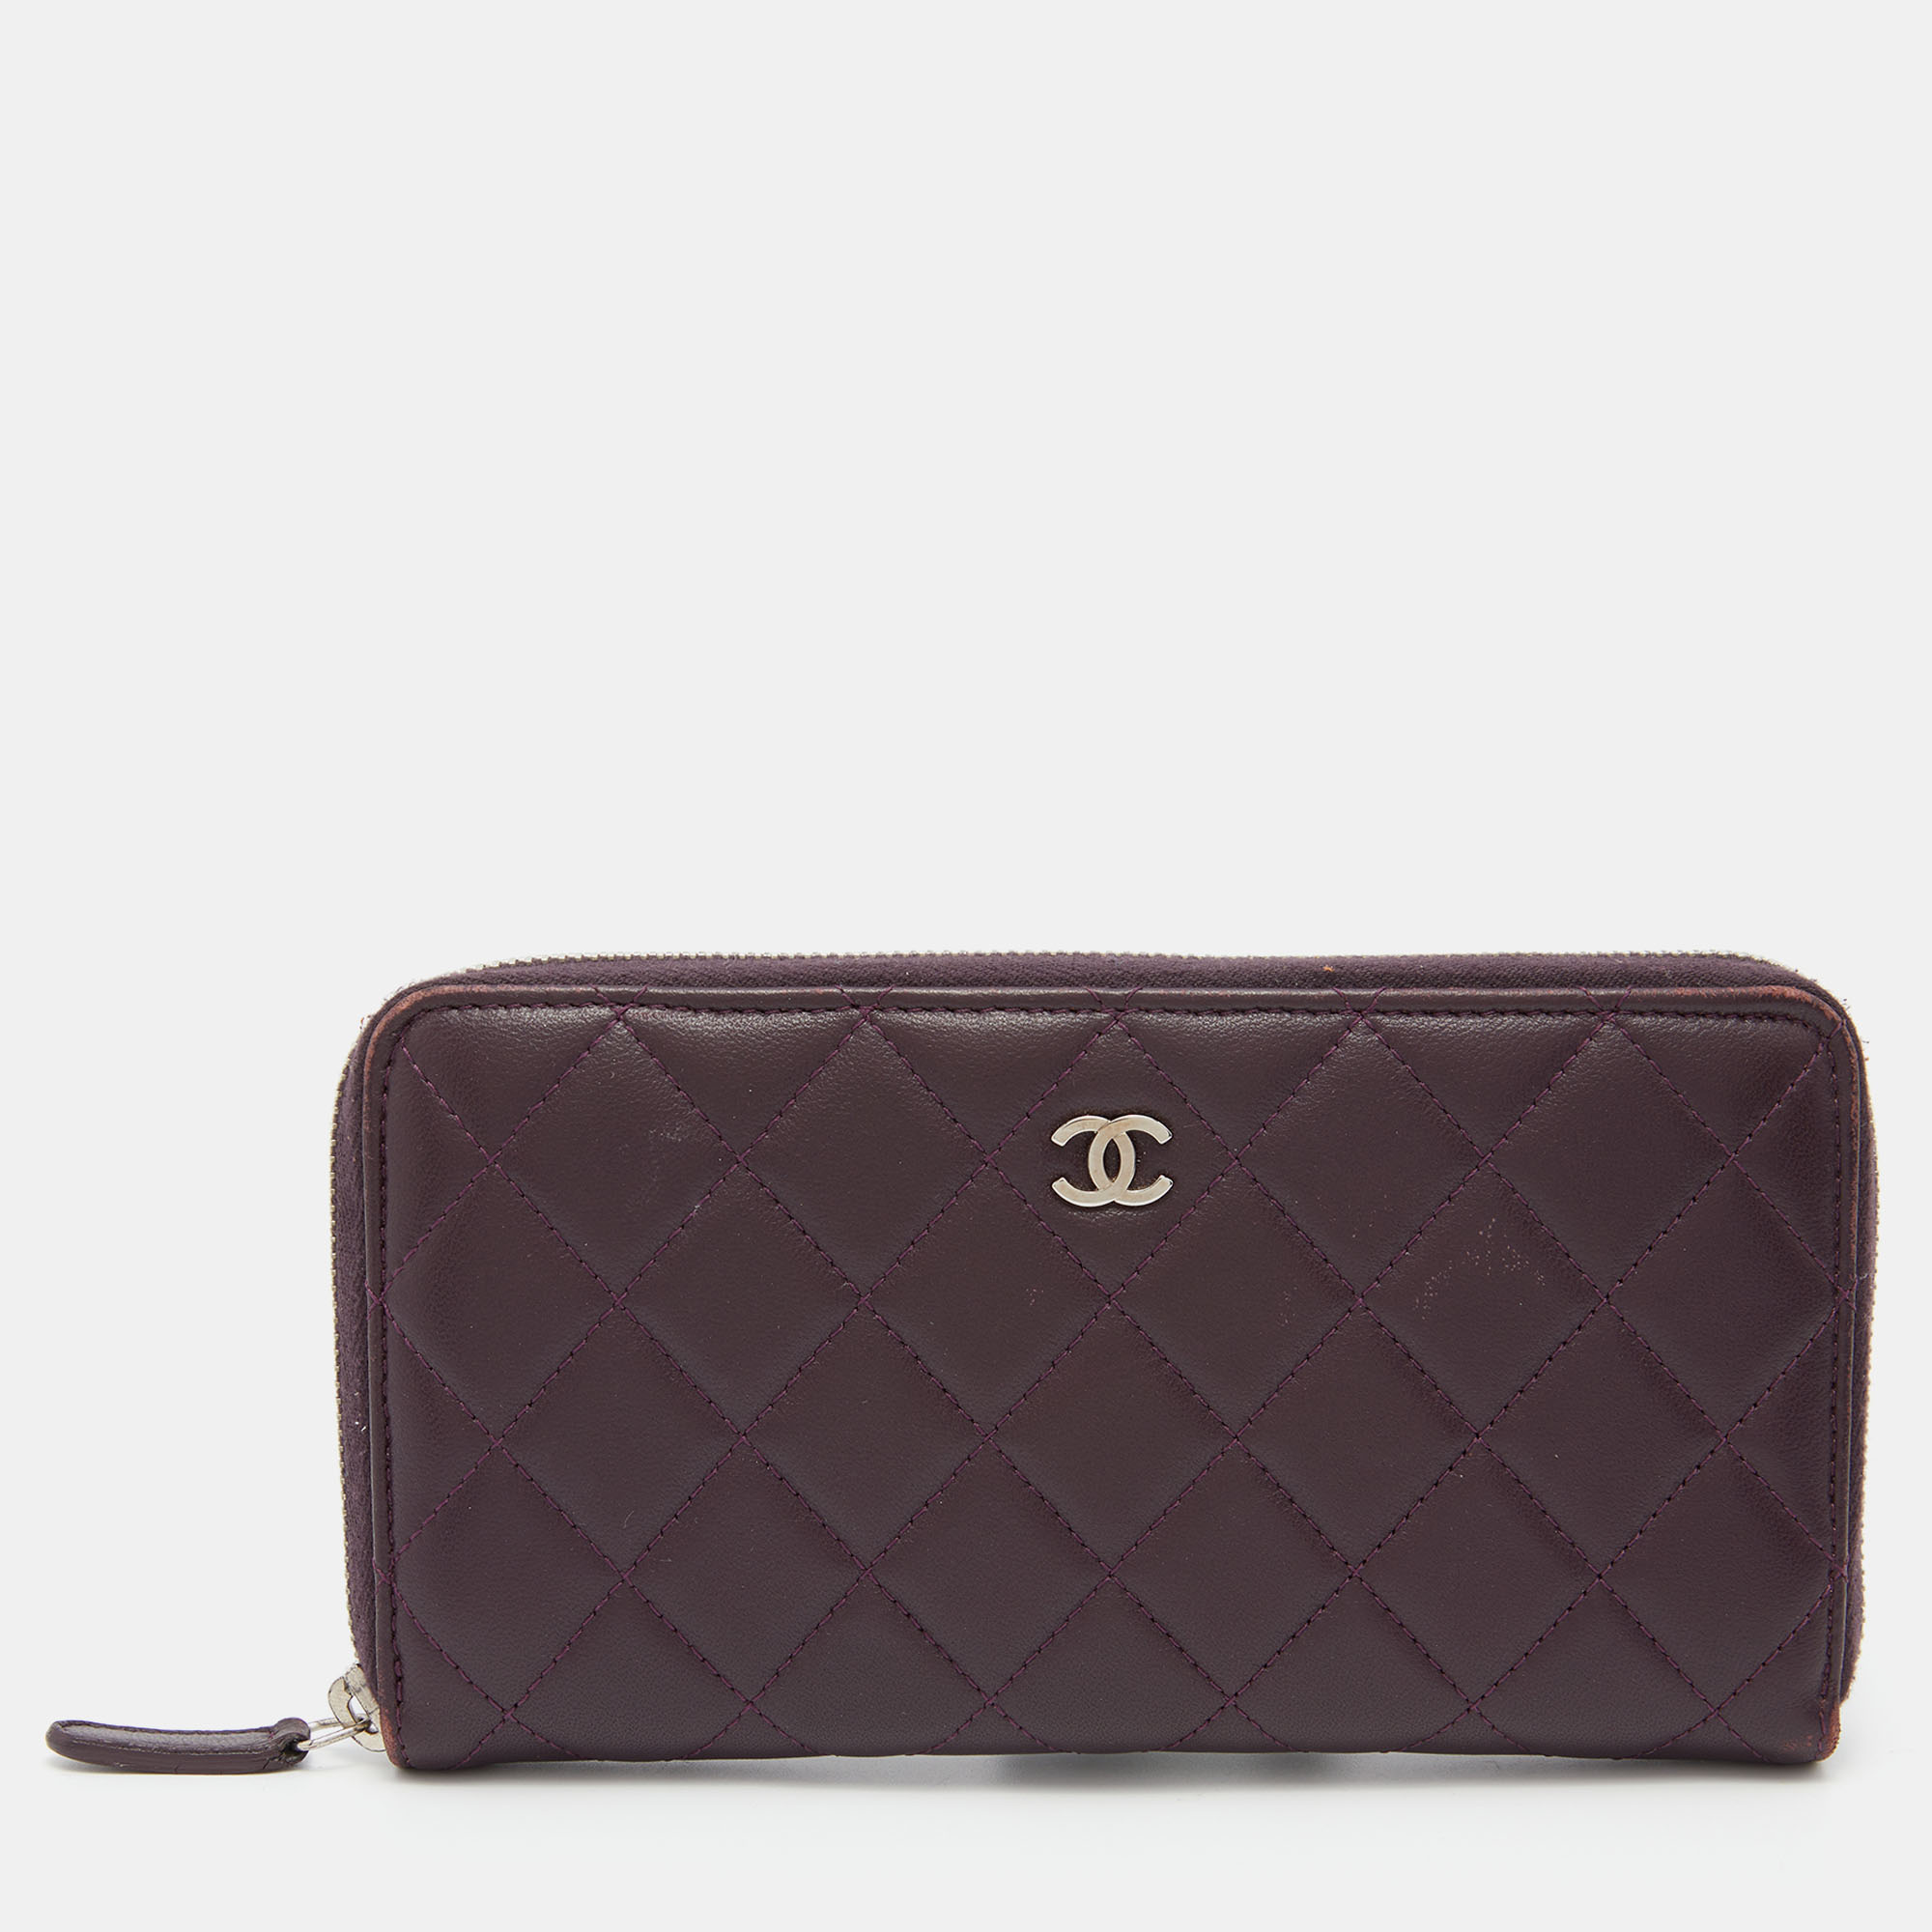 Pre-owned Chanel Purple Quilted Leather Cc Zip Around Wallet